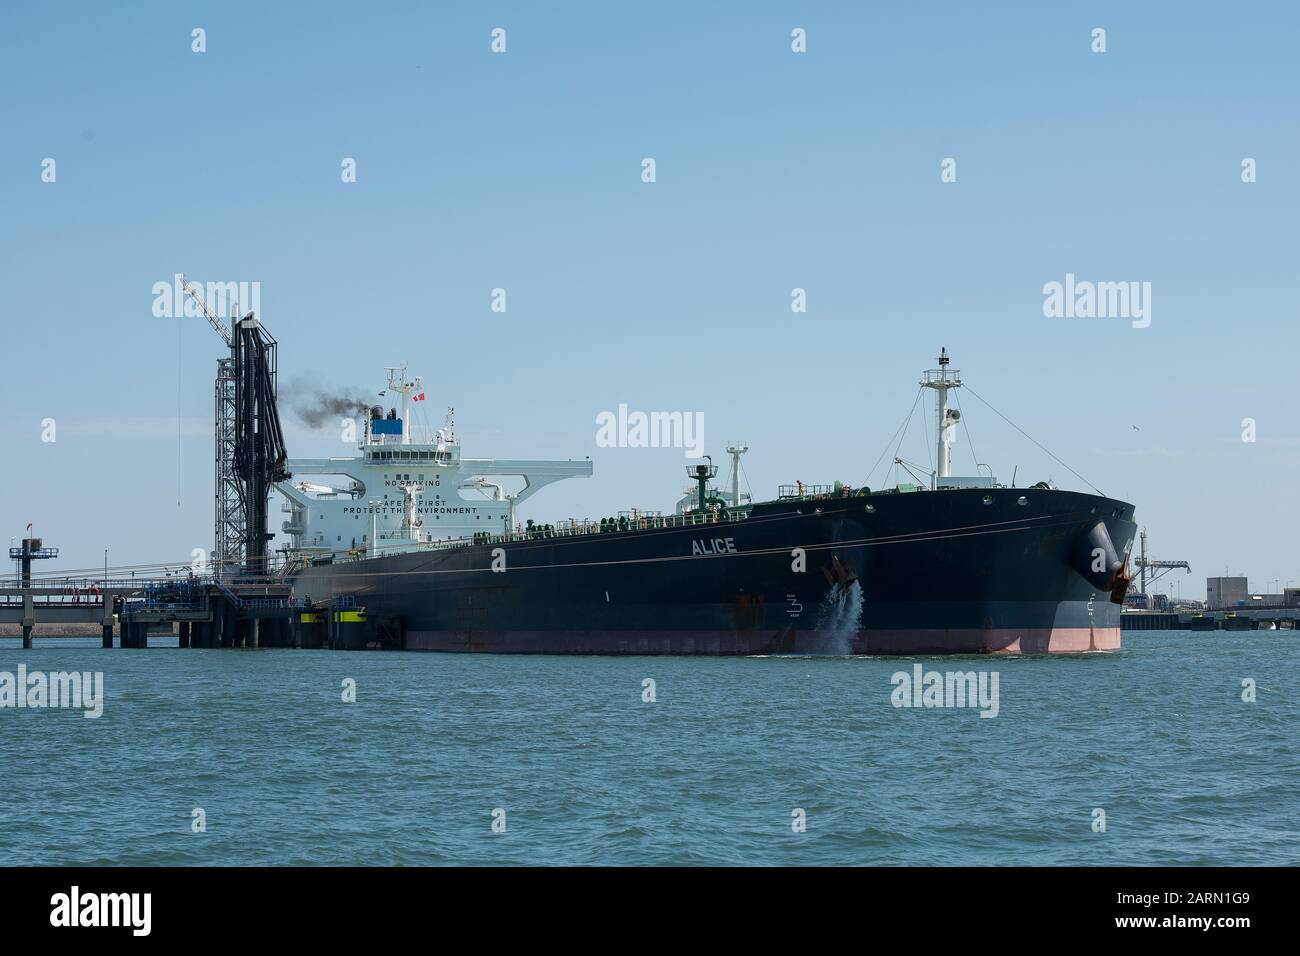 Rotterdam, Netherlands - July 30, 2019; Belgium crude oil tanker called Alice lying in the harbor of Rotterdam, Europe on the Maasvlakte Oil Terminal Stock Photo